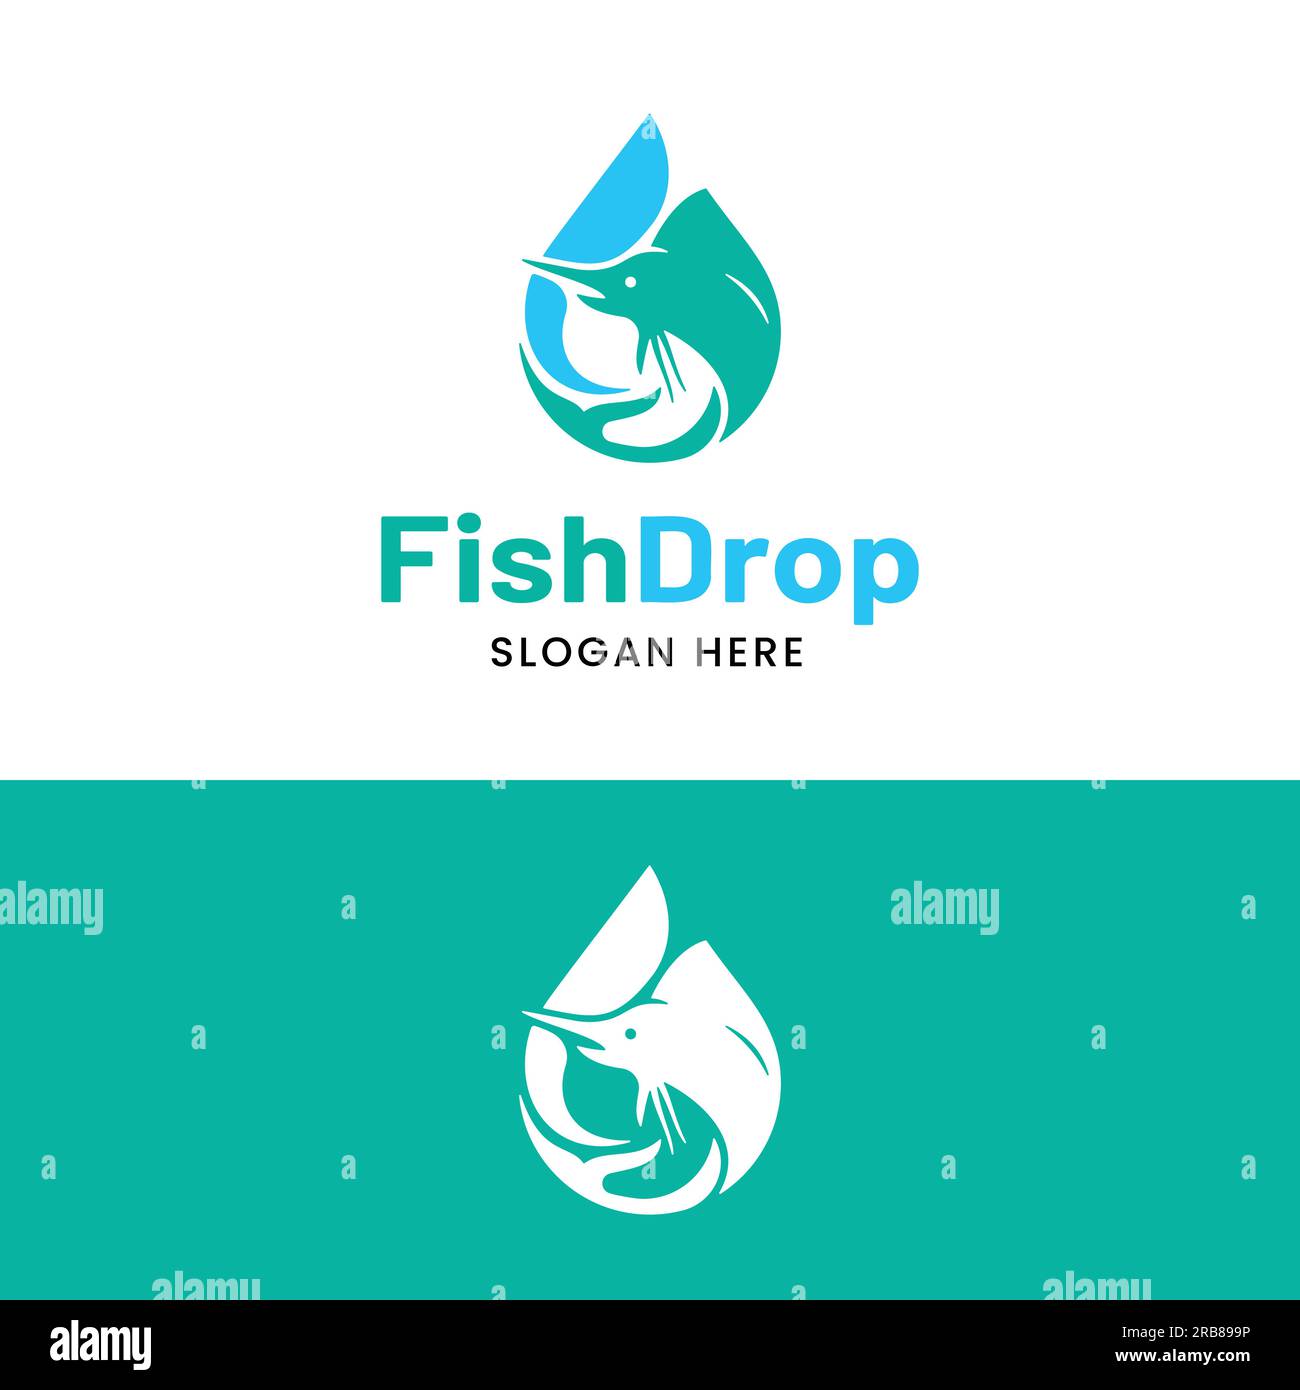 Sail Fish with Water Drop in Simple Flat Style for Fishing Fisherman Fish Market Seafood Restaurant Logo Design Template Stock Vector